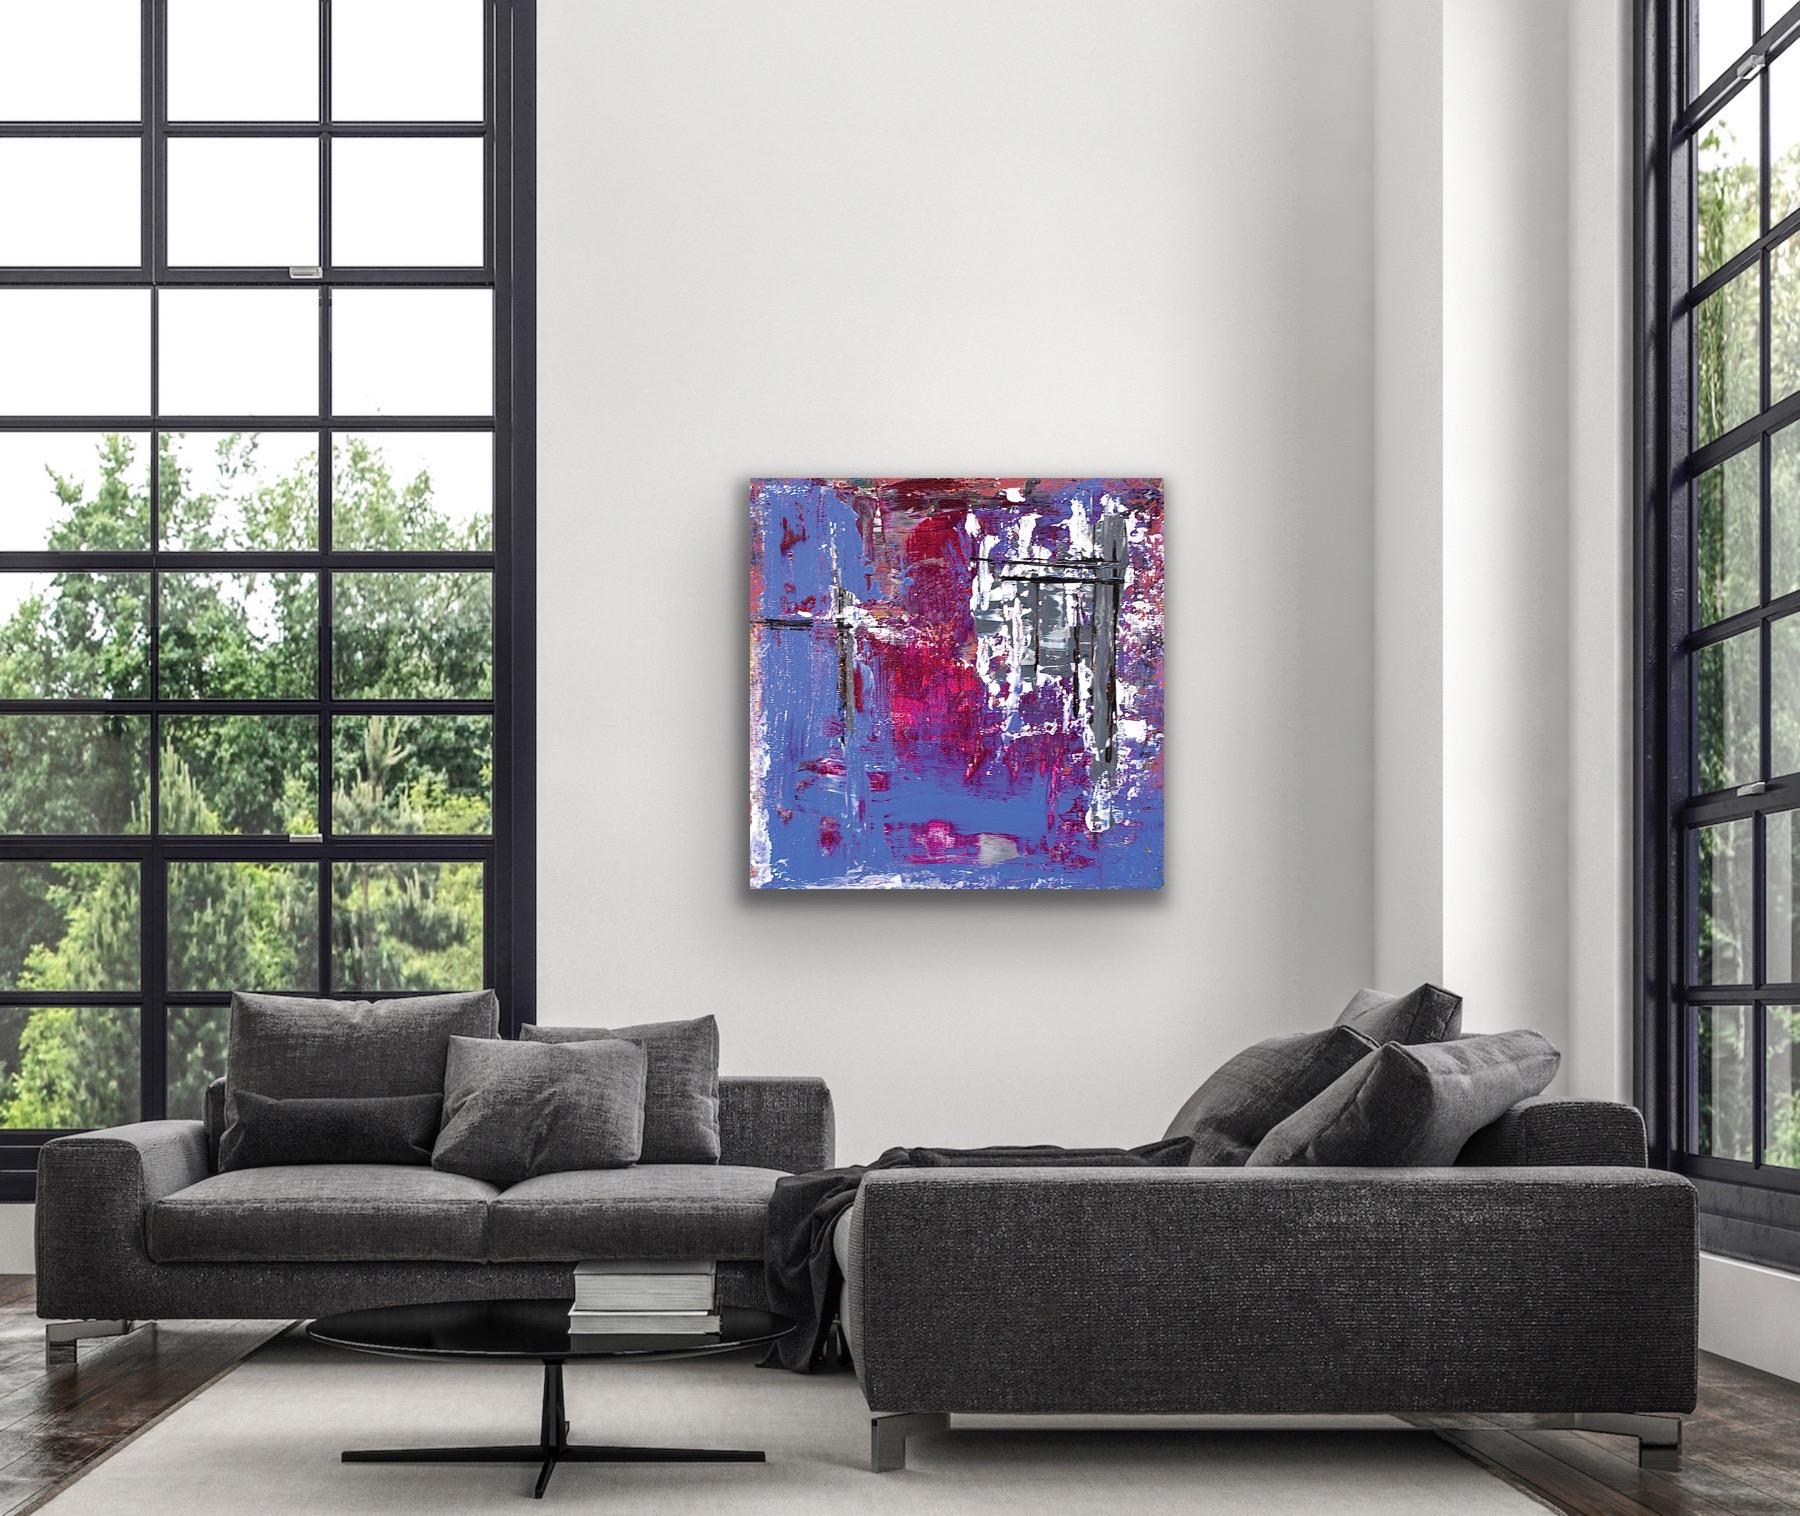 Abstract Painting, Modern Wall Art, Large Indoor Outdoor Decor, Print on Metal 3